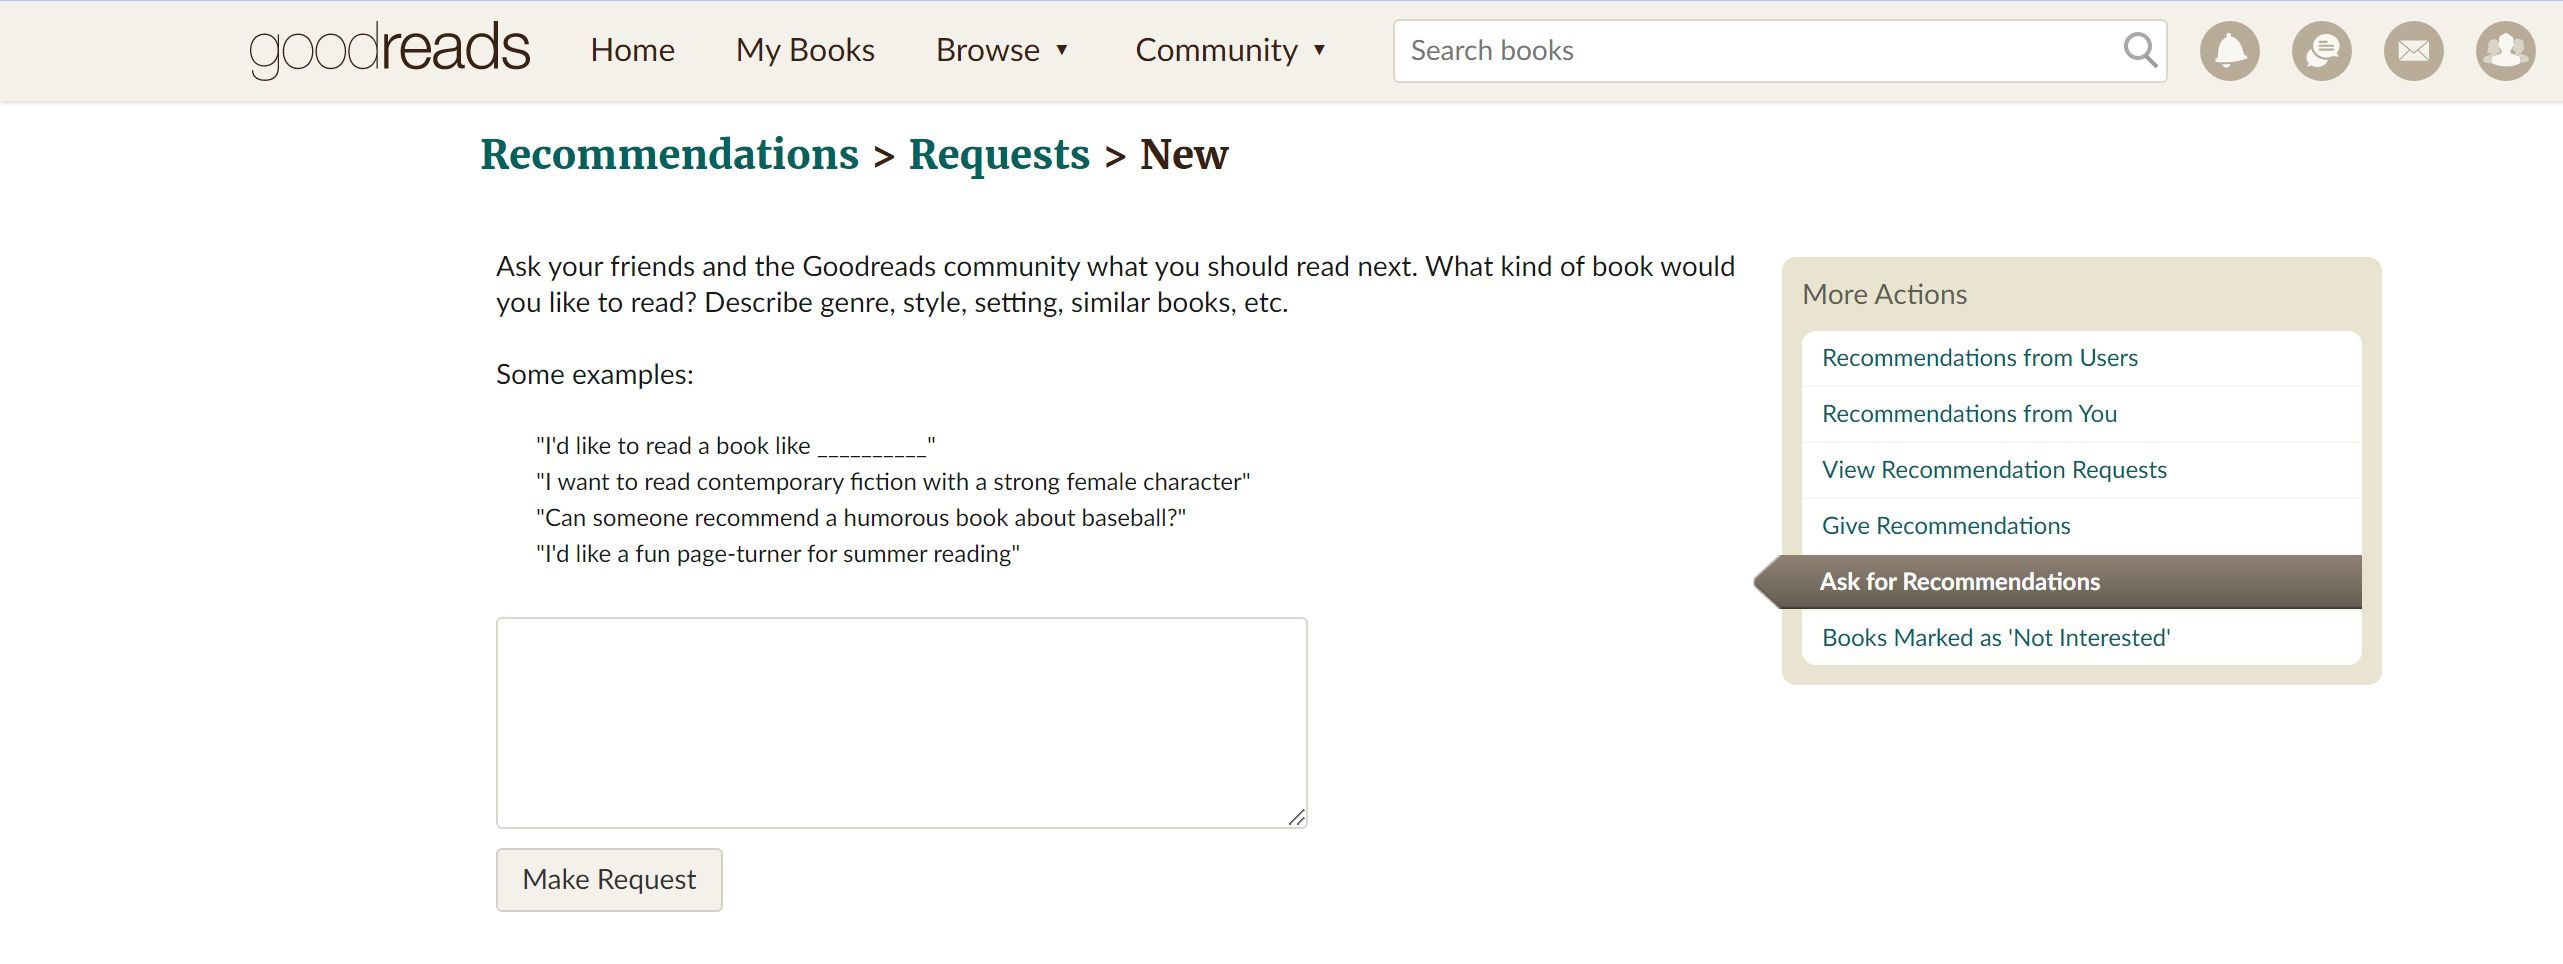 Goodreads's Ask for Recommendations page, showing a box where you can type in requests.